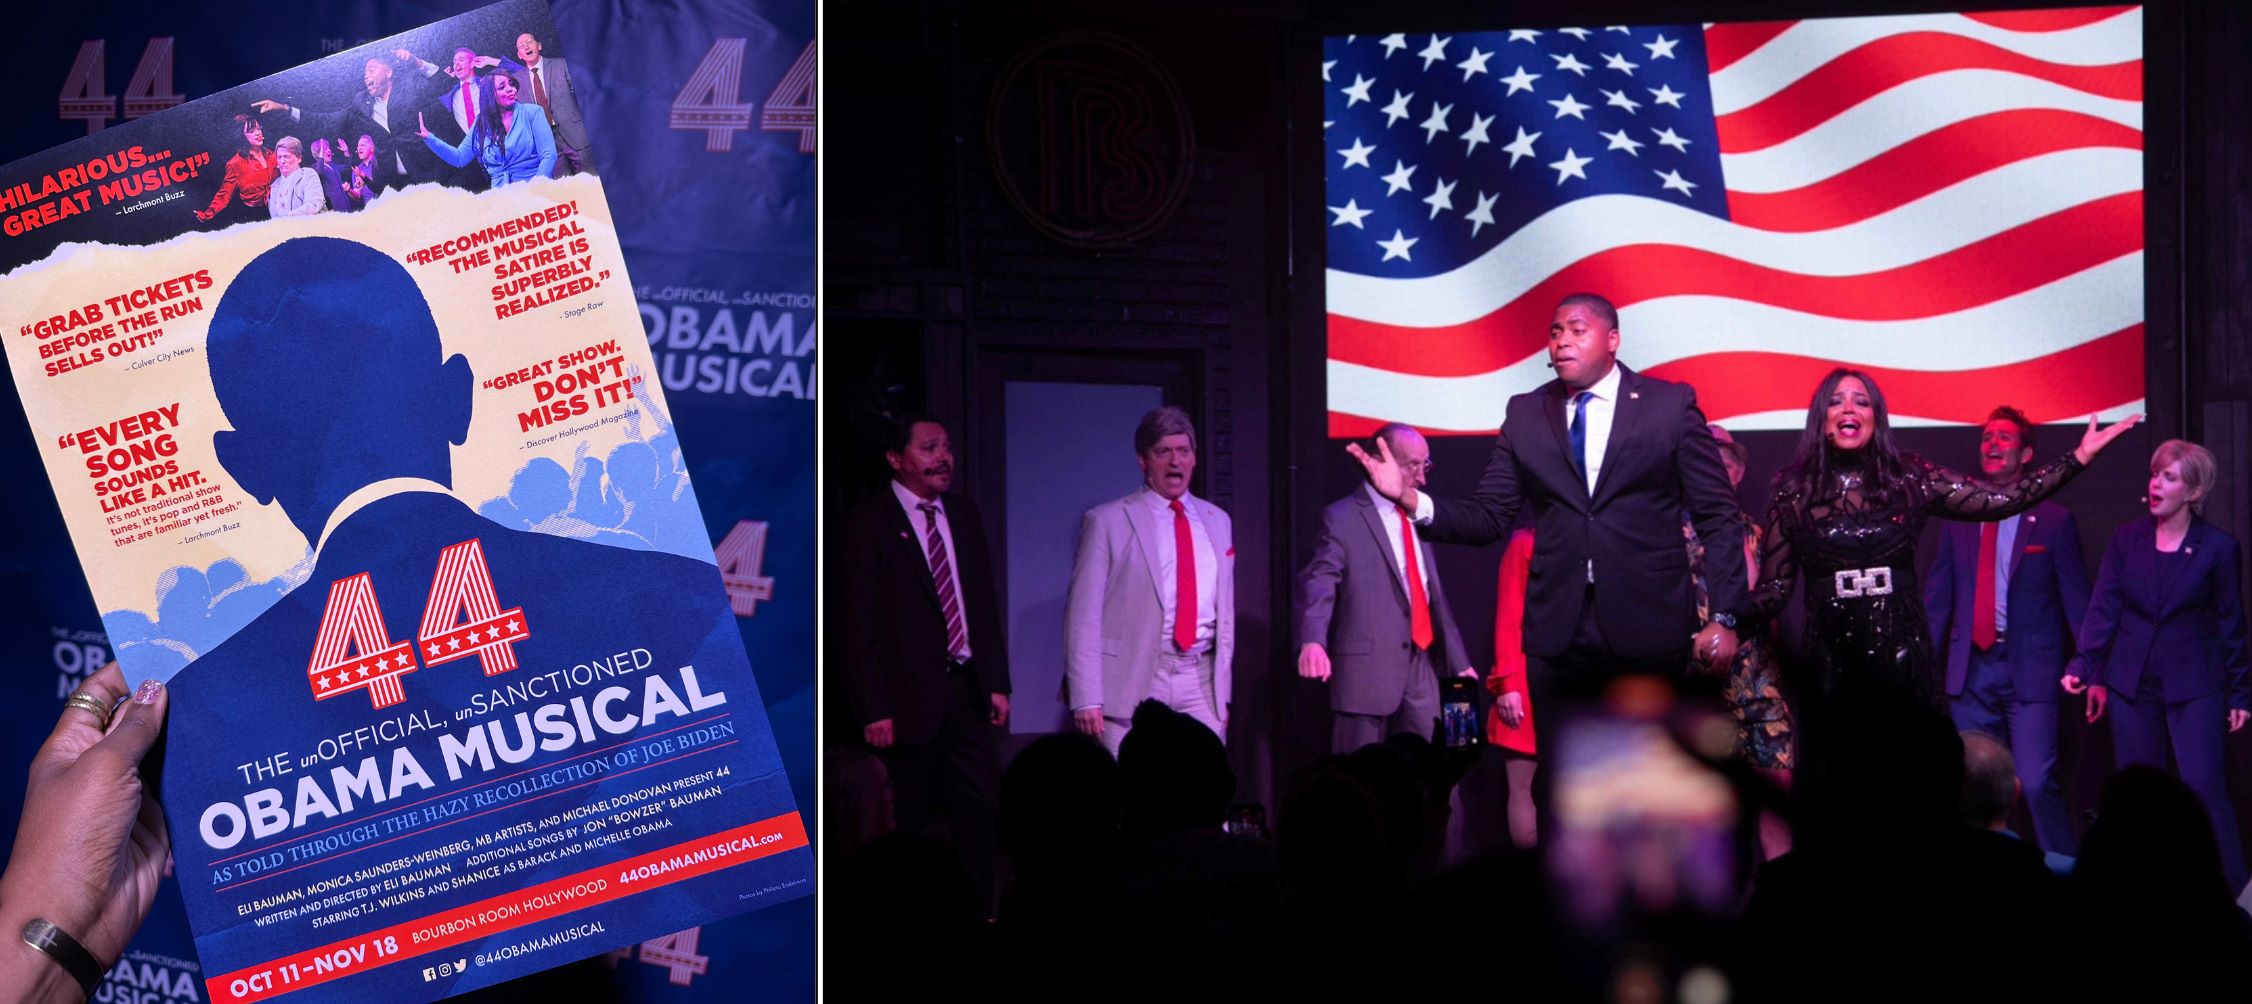 “44 – THE unOFFICIAL, unSANCTIONED OBAMA MUSICAL” Returns for a Third Term to The Bourbon Room Hollywood